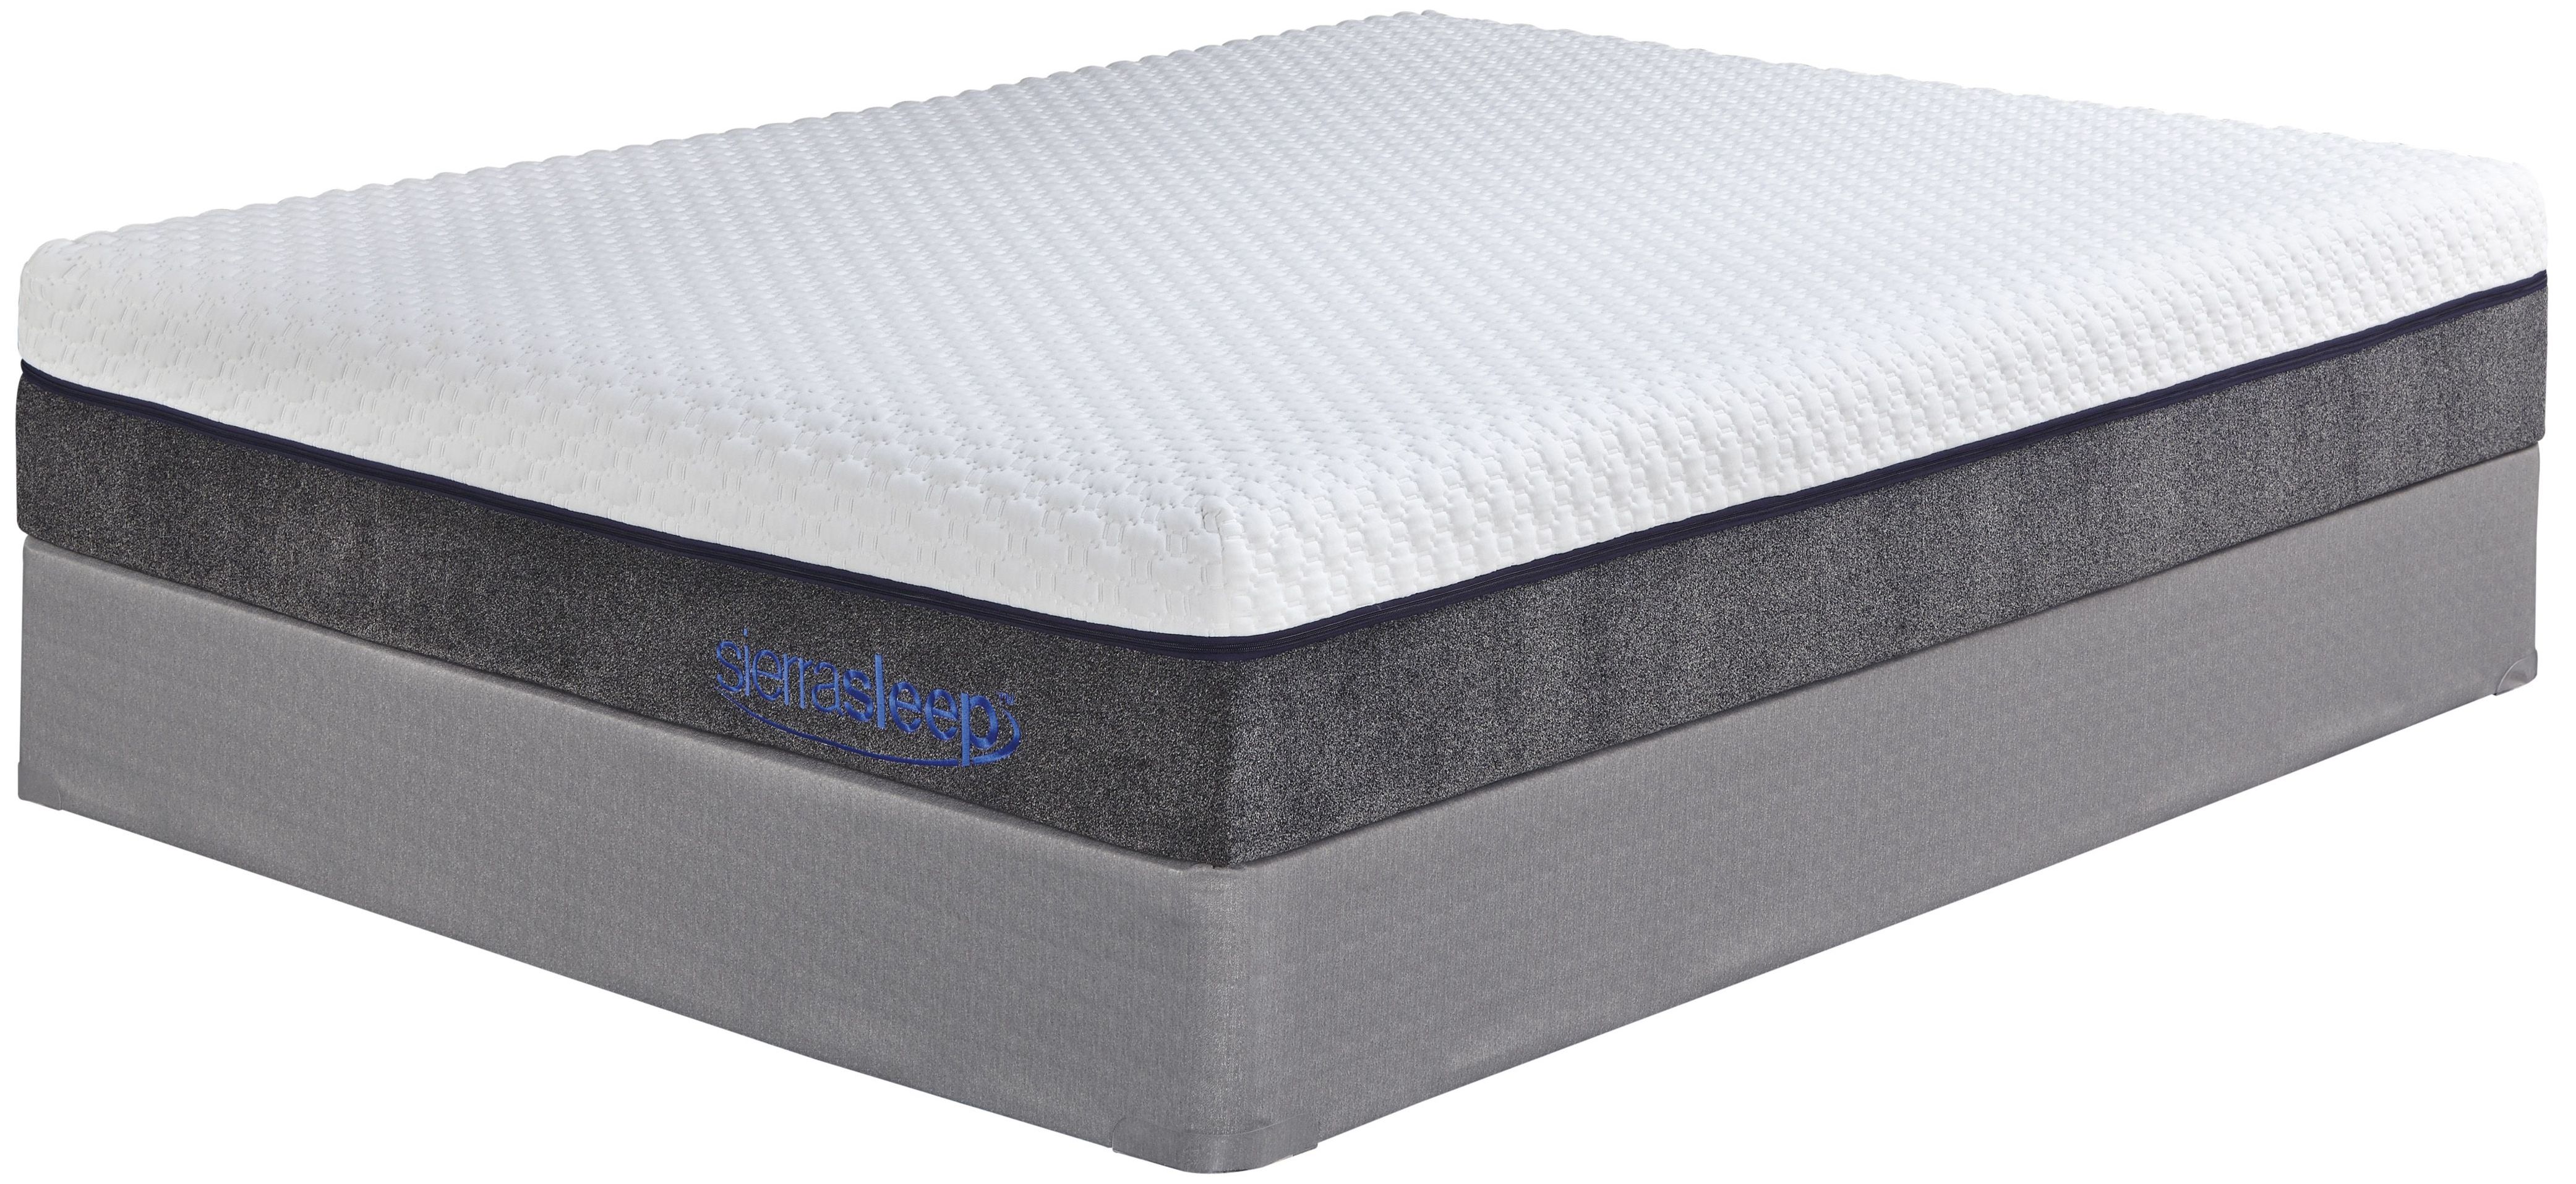 11 inch import innerspring mattress review